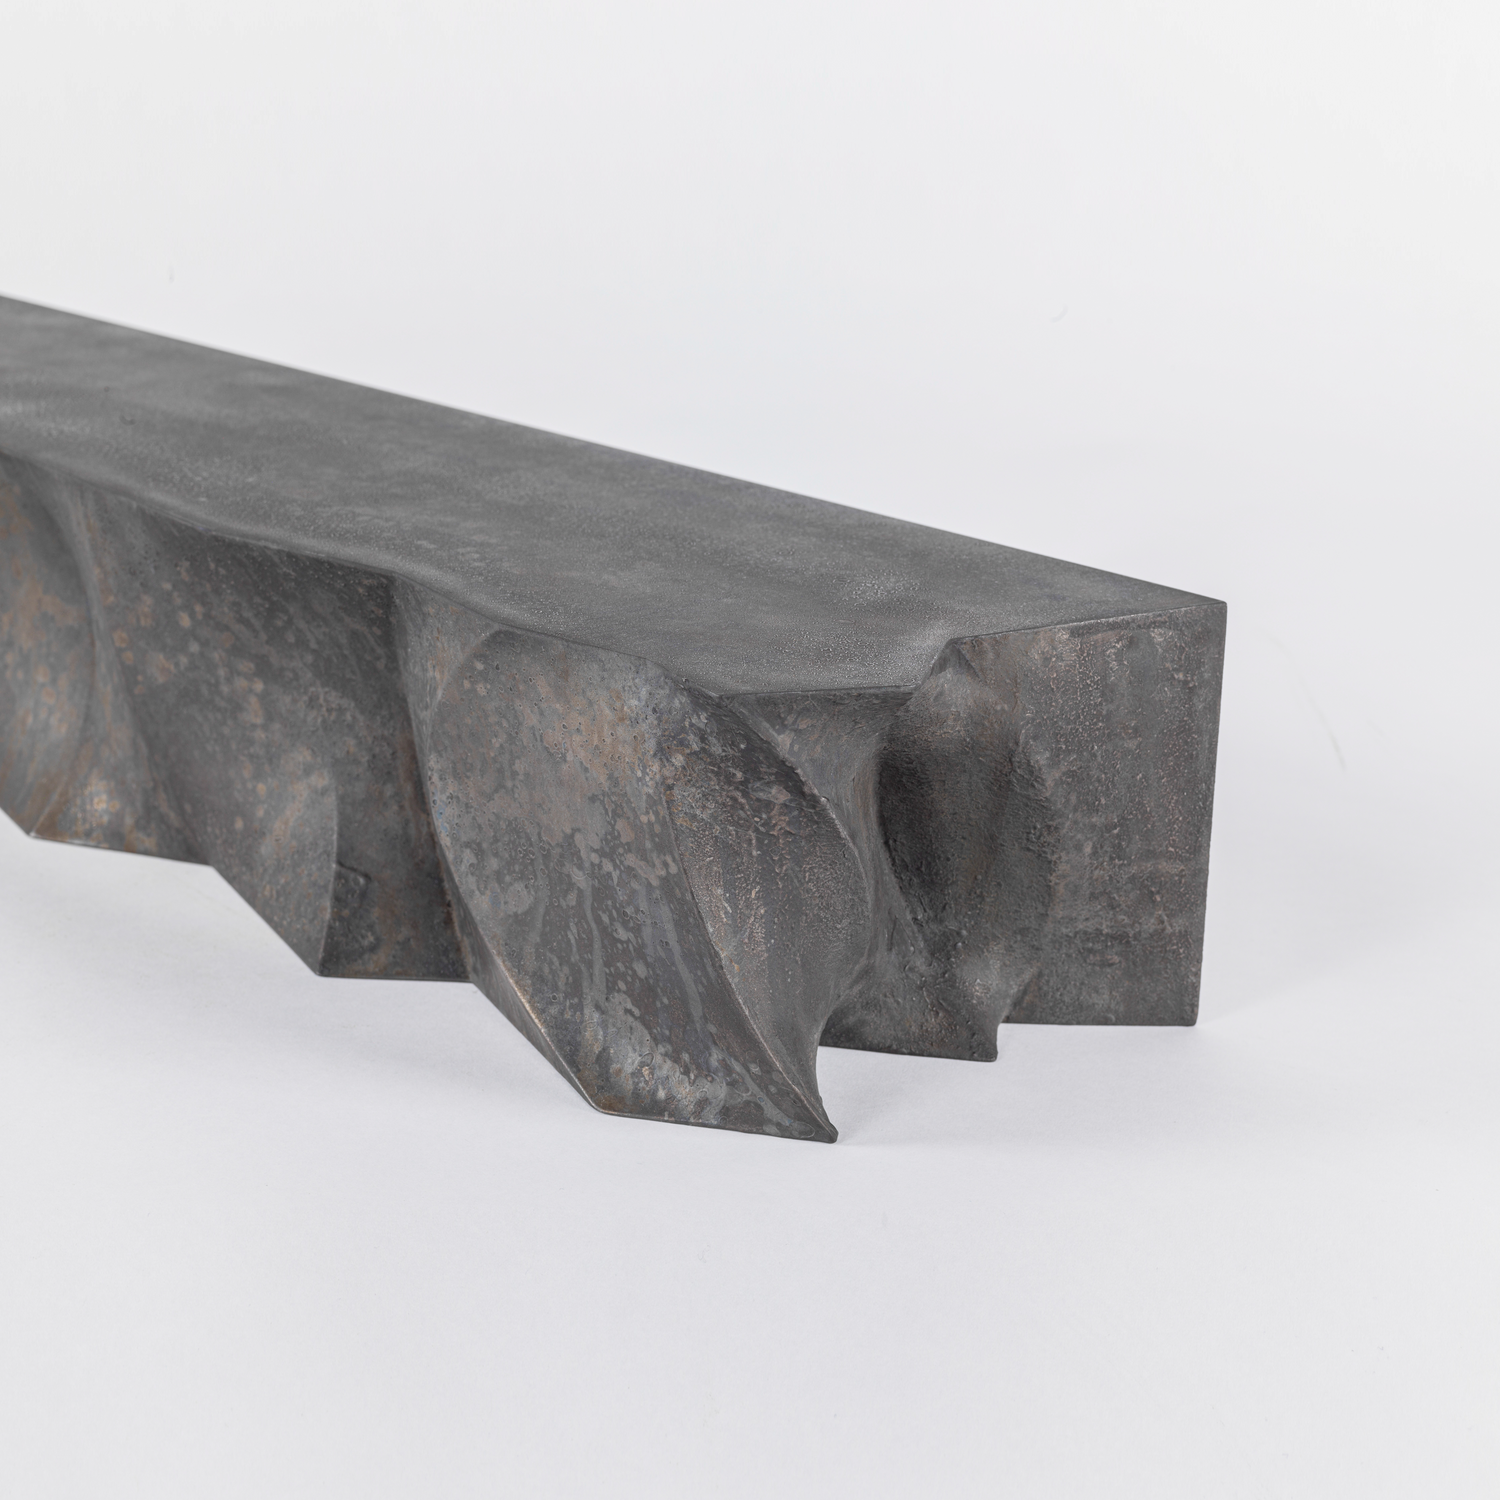 Brutalist inspired sculptural floating shelf coated in patinated manganese